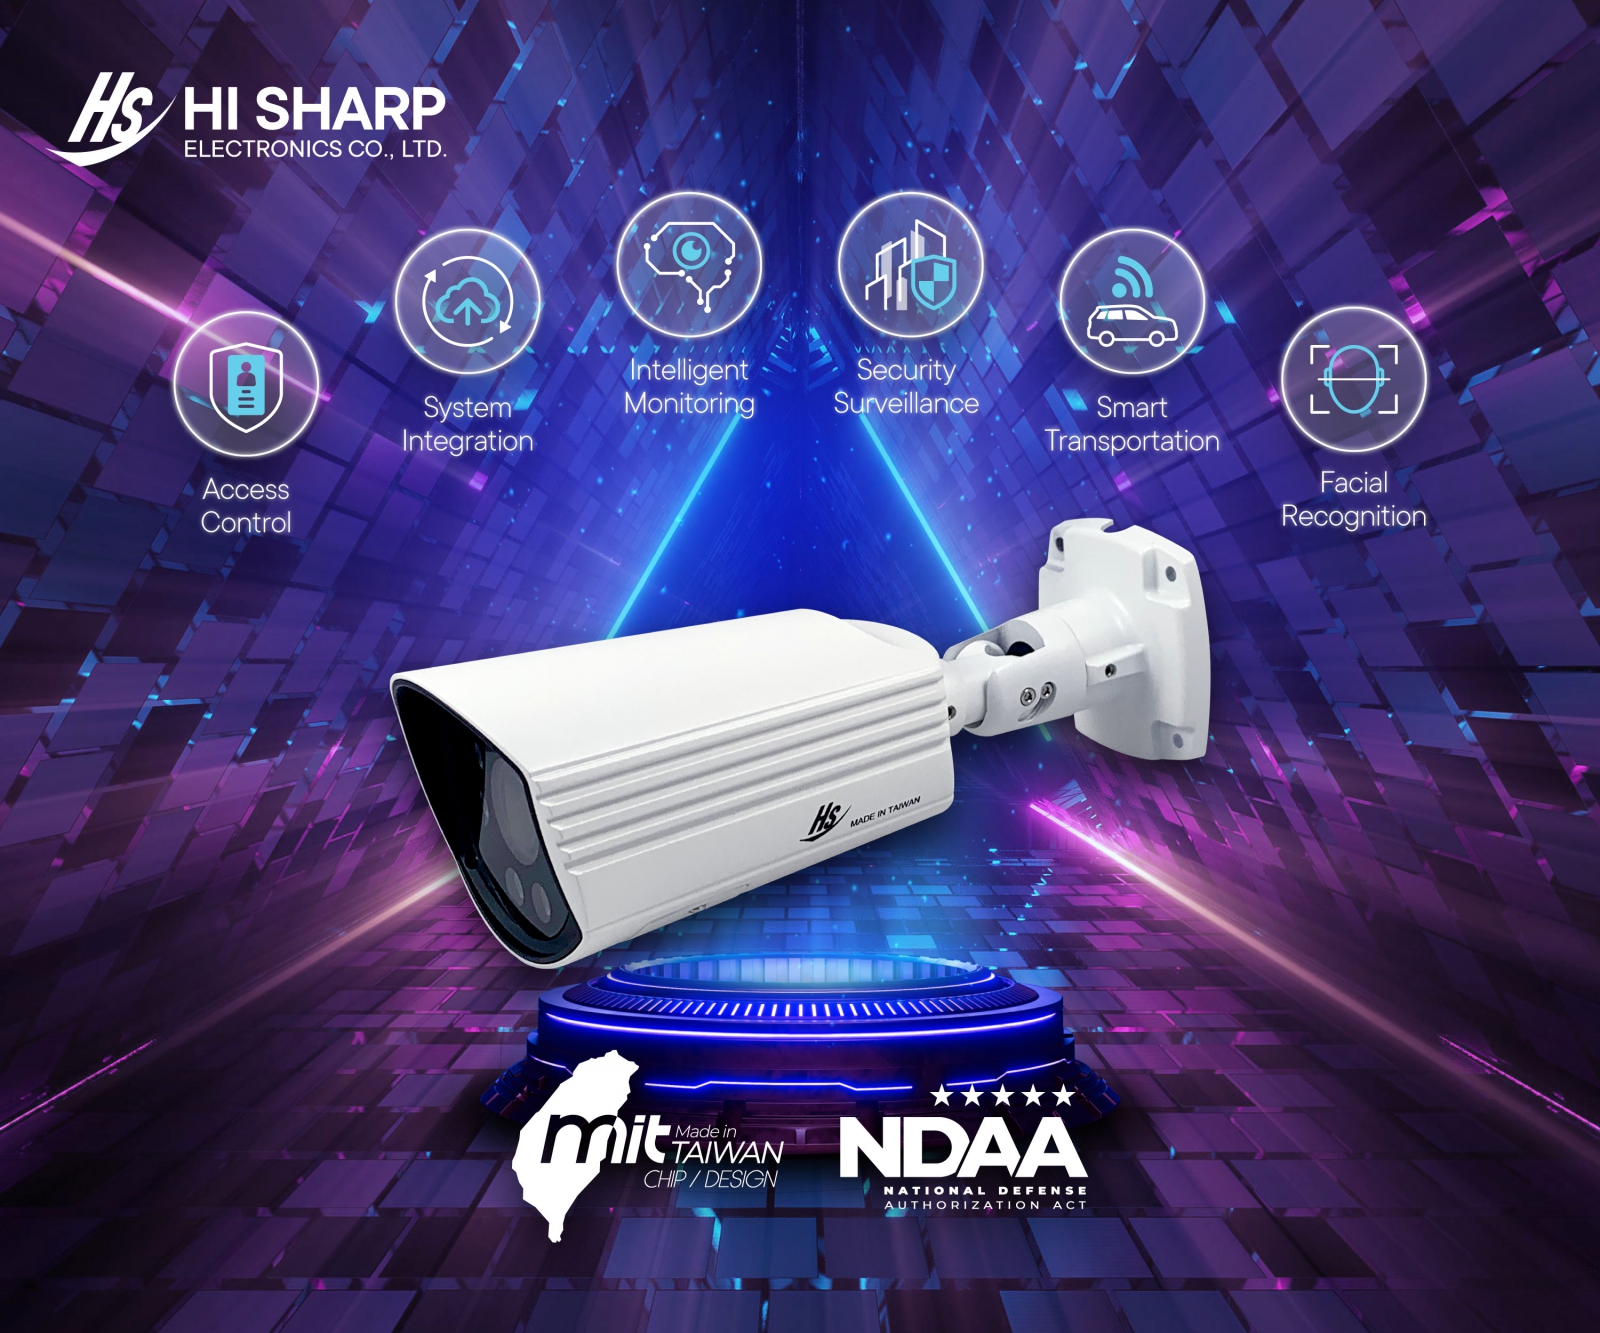 Hi Sharp Embraces Focus on NDAA-Compliant Security Solutions